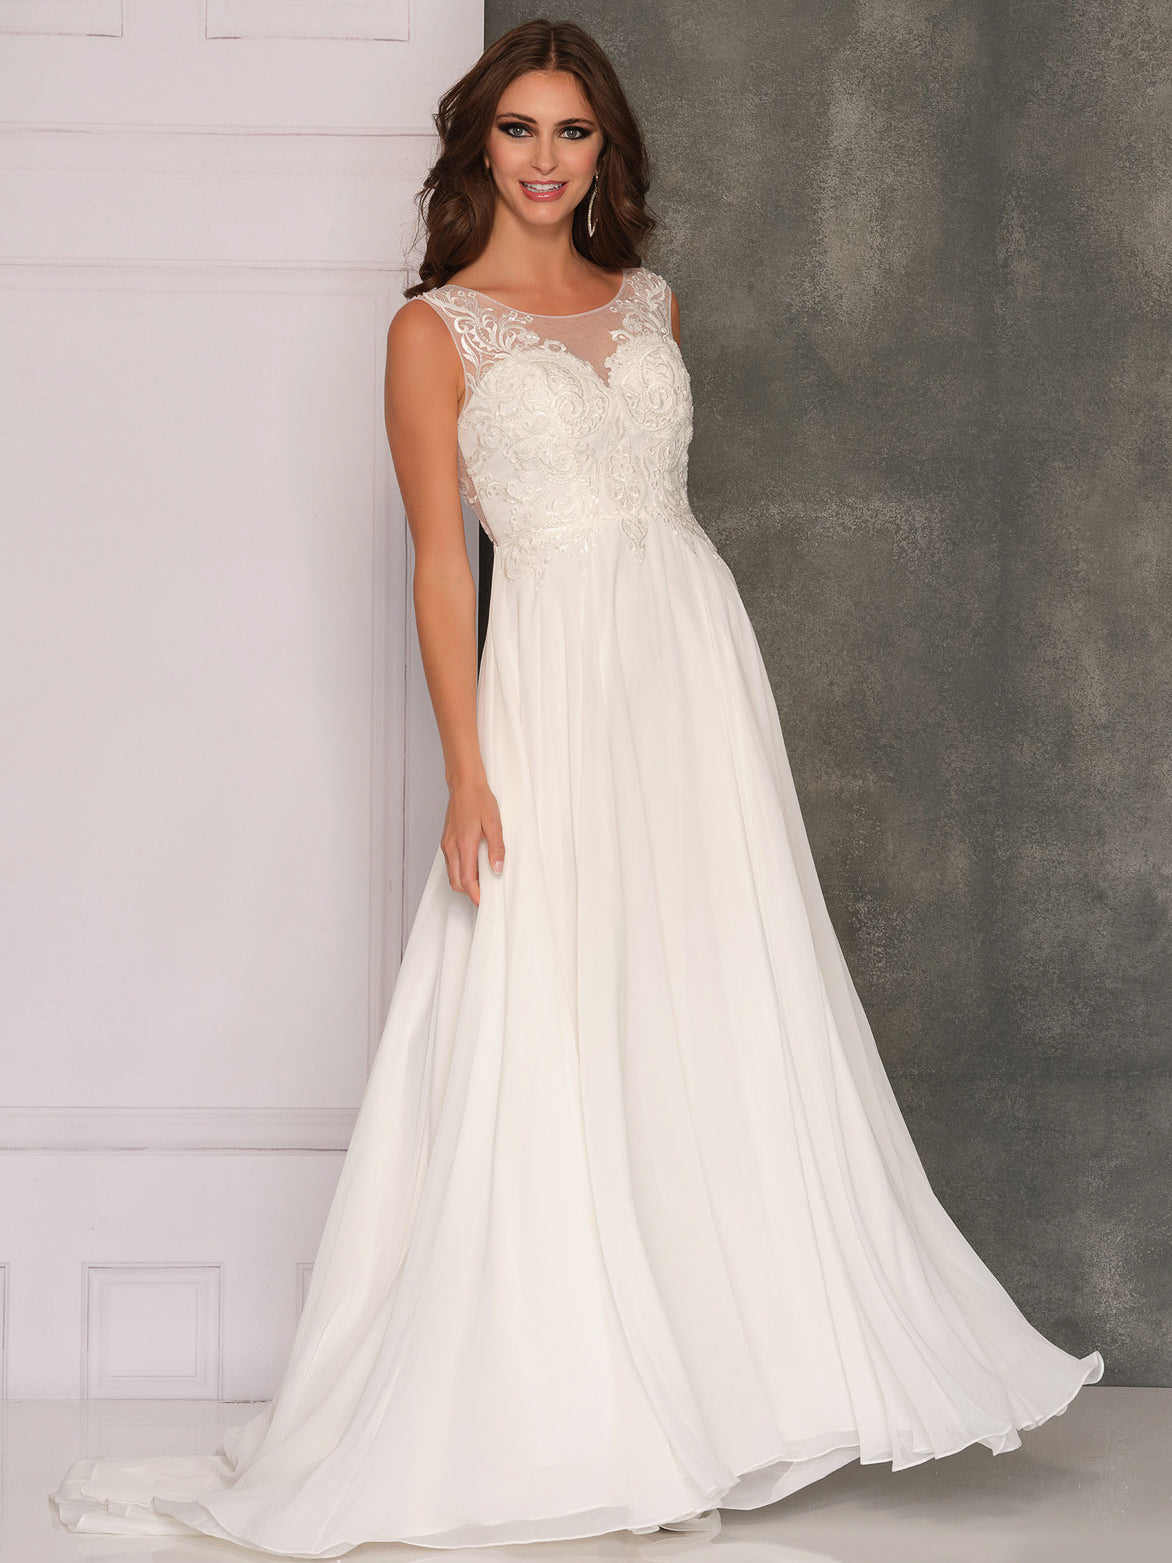 BOAT NECK SWEETHEART ILLUSION WEDDING GOWN